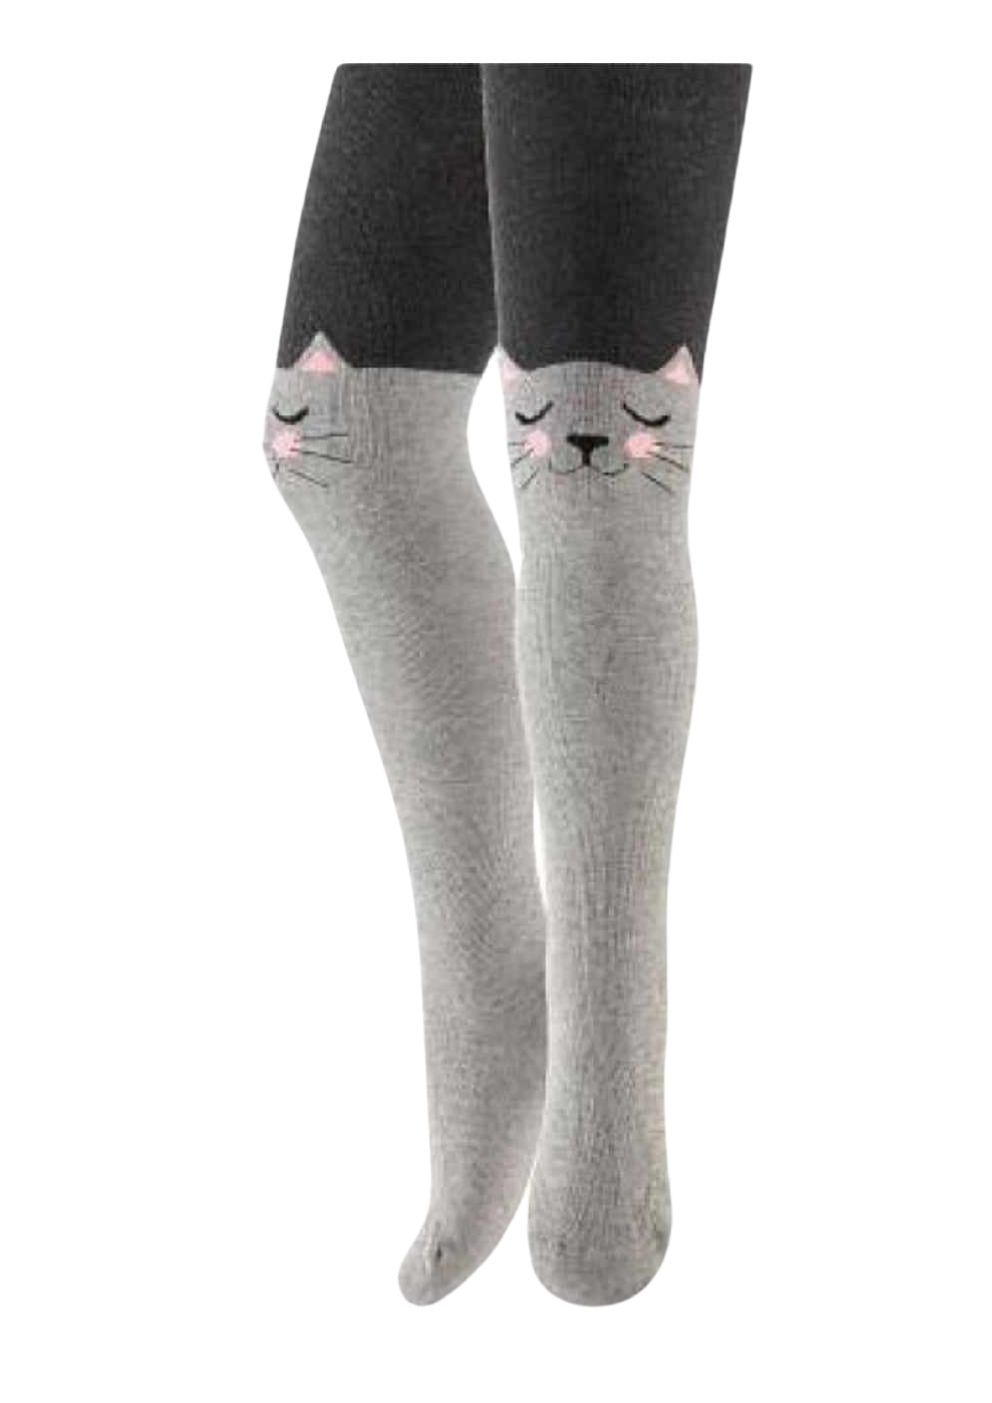 Girls' patterned tights with cats